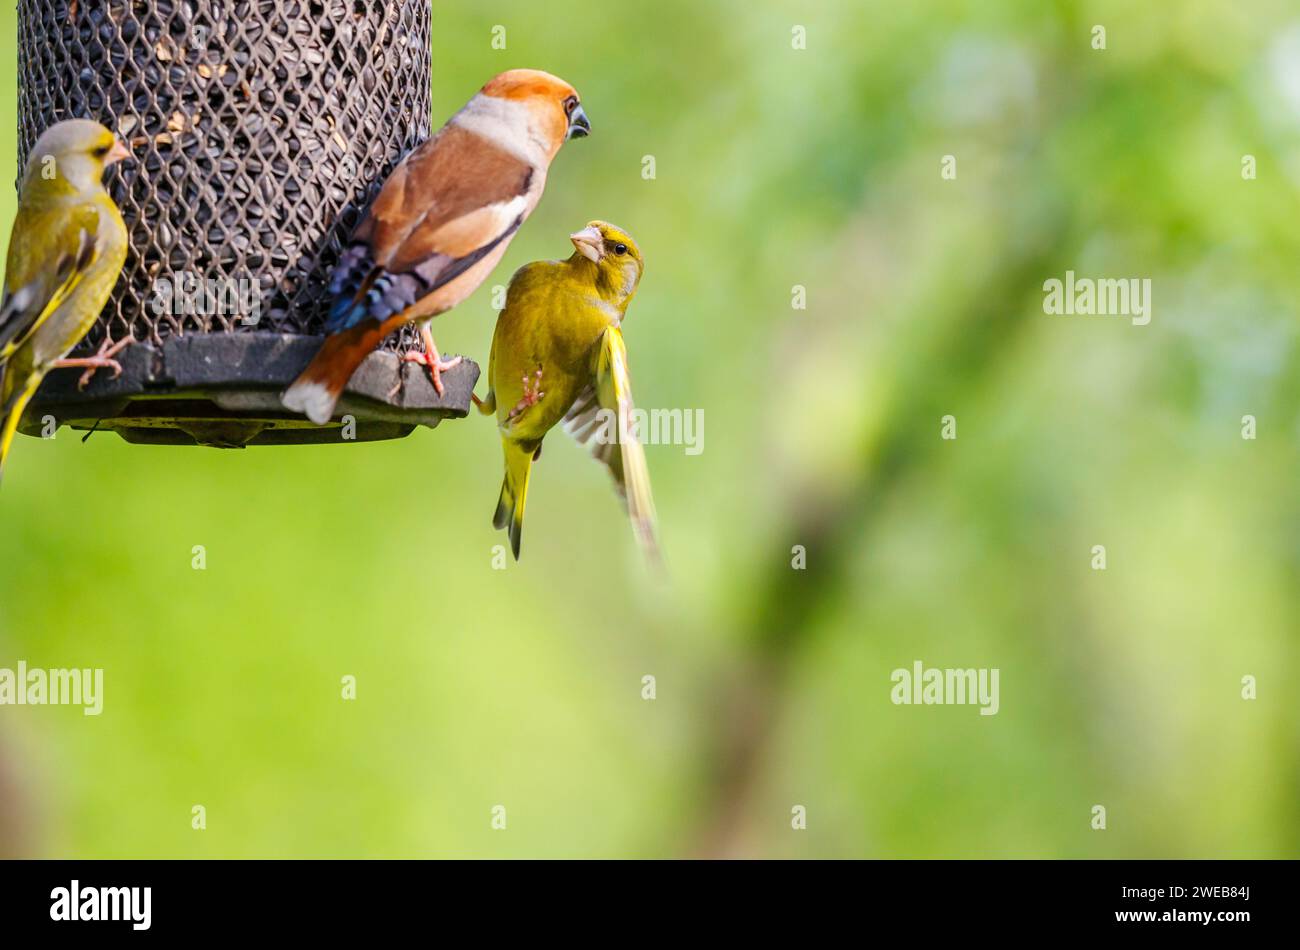 A hawfinch (Coccothraustes coccothraustes) squabbles with a siskin (Carduelis spinus) at a bird feeder, in Koros-Maros National Park, Hungary Stock Photo